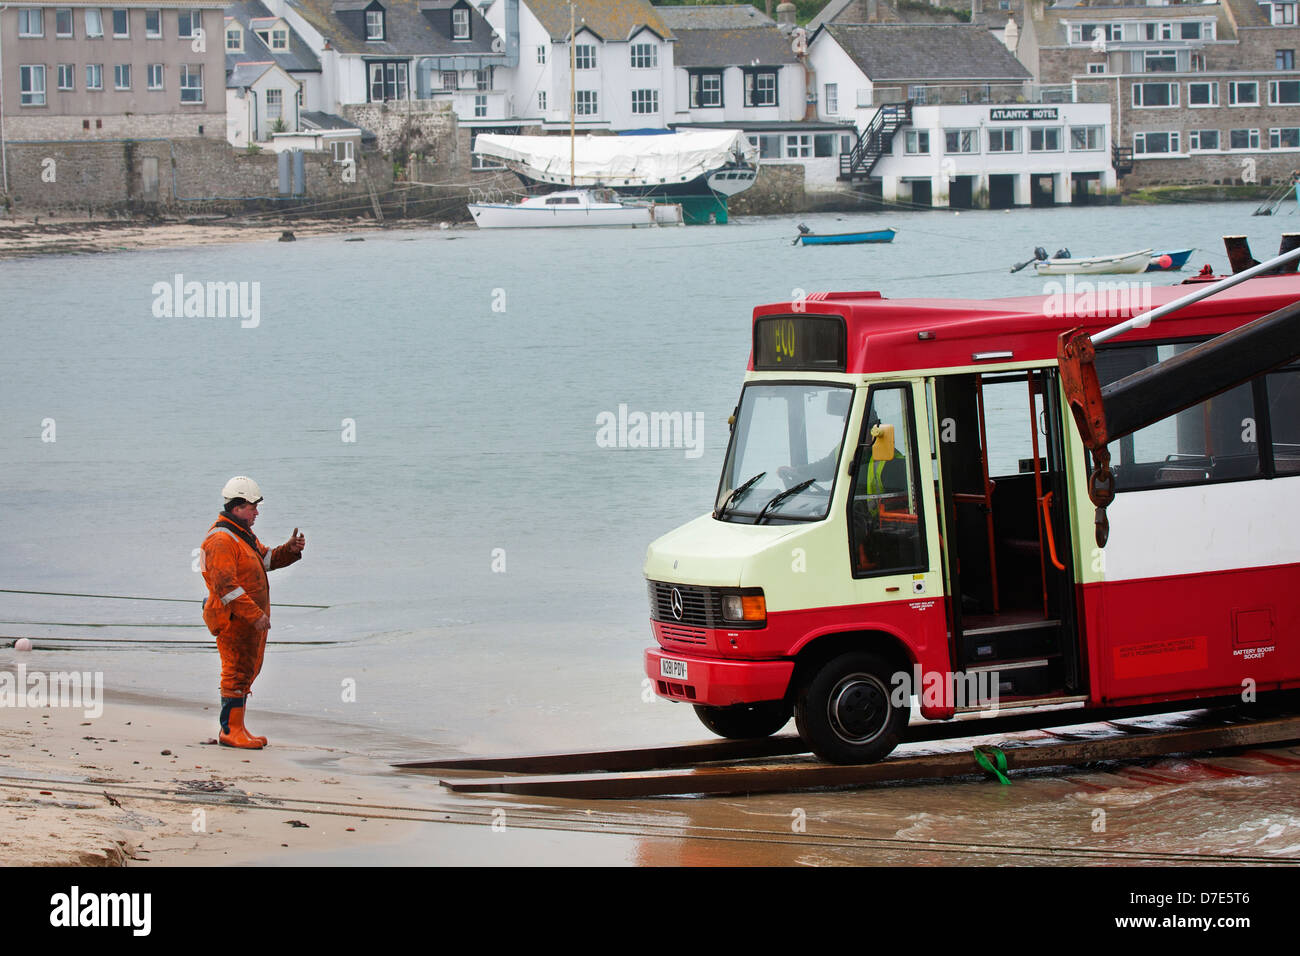 New bus being delivered to St Mary's, Scilly Isles Stock Photo